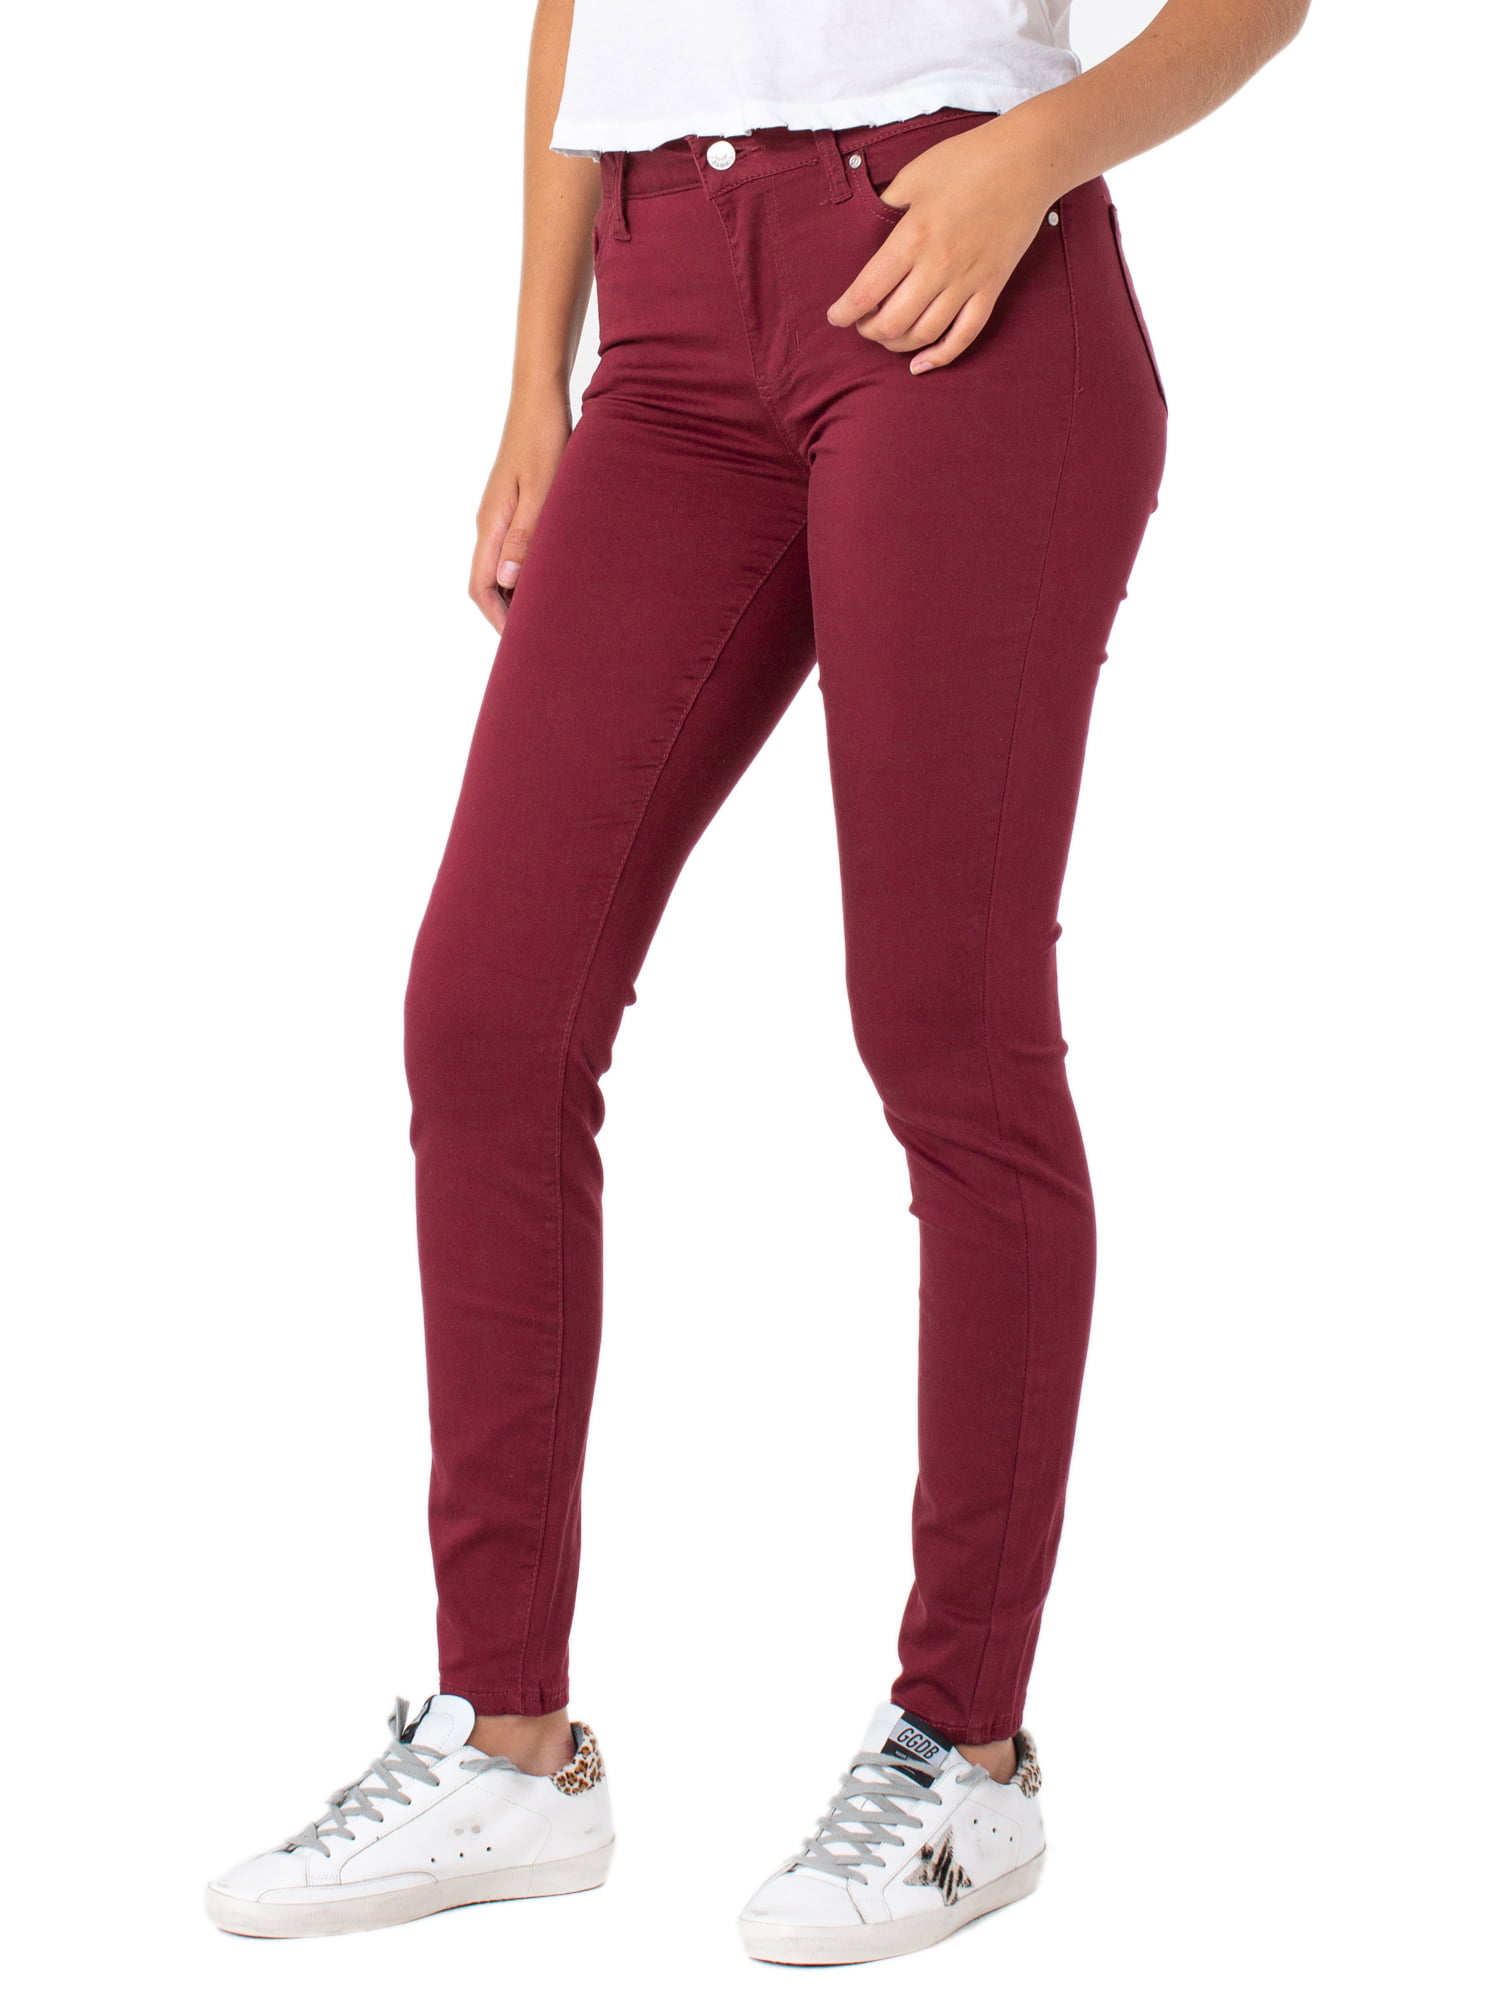 Celebrity Pink Womens Mid Rise Colored Skinny Pants